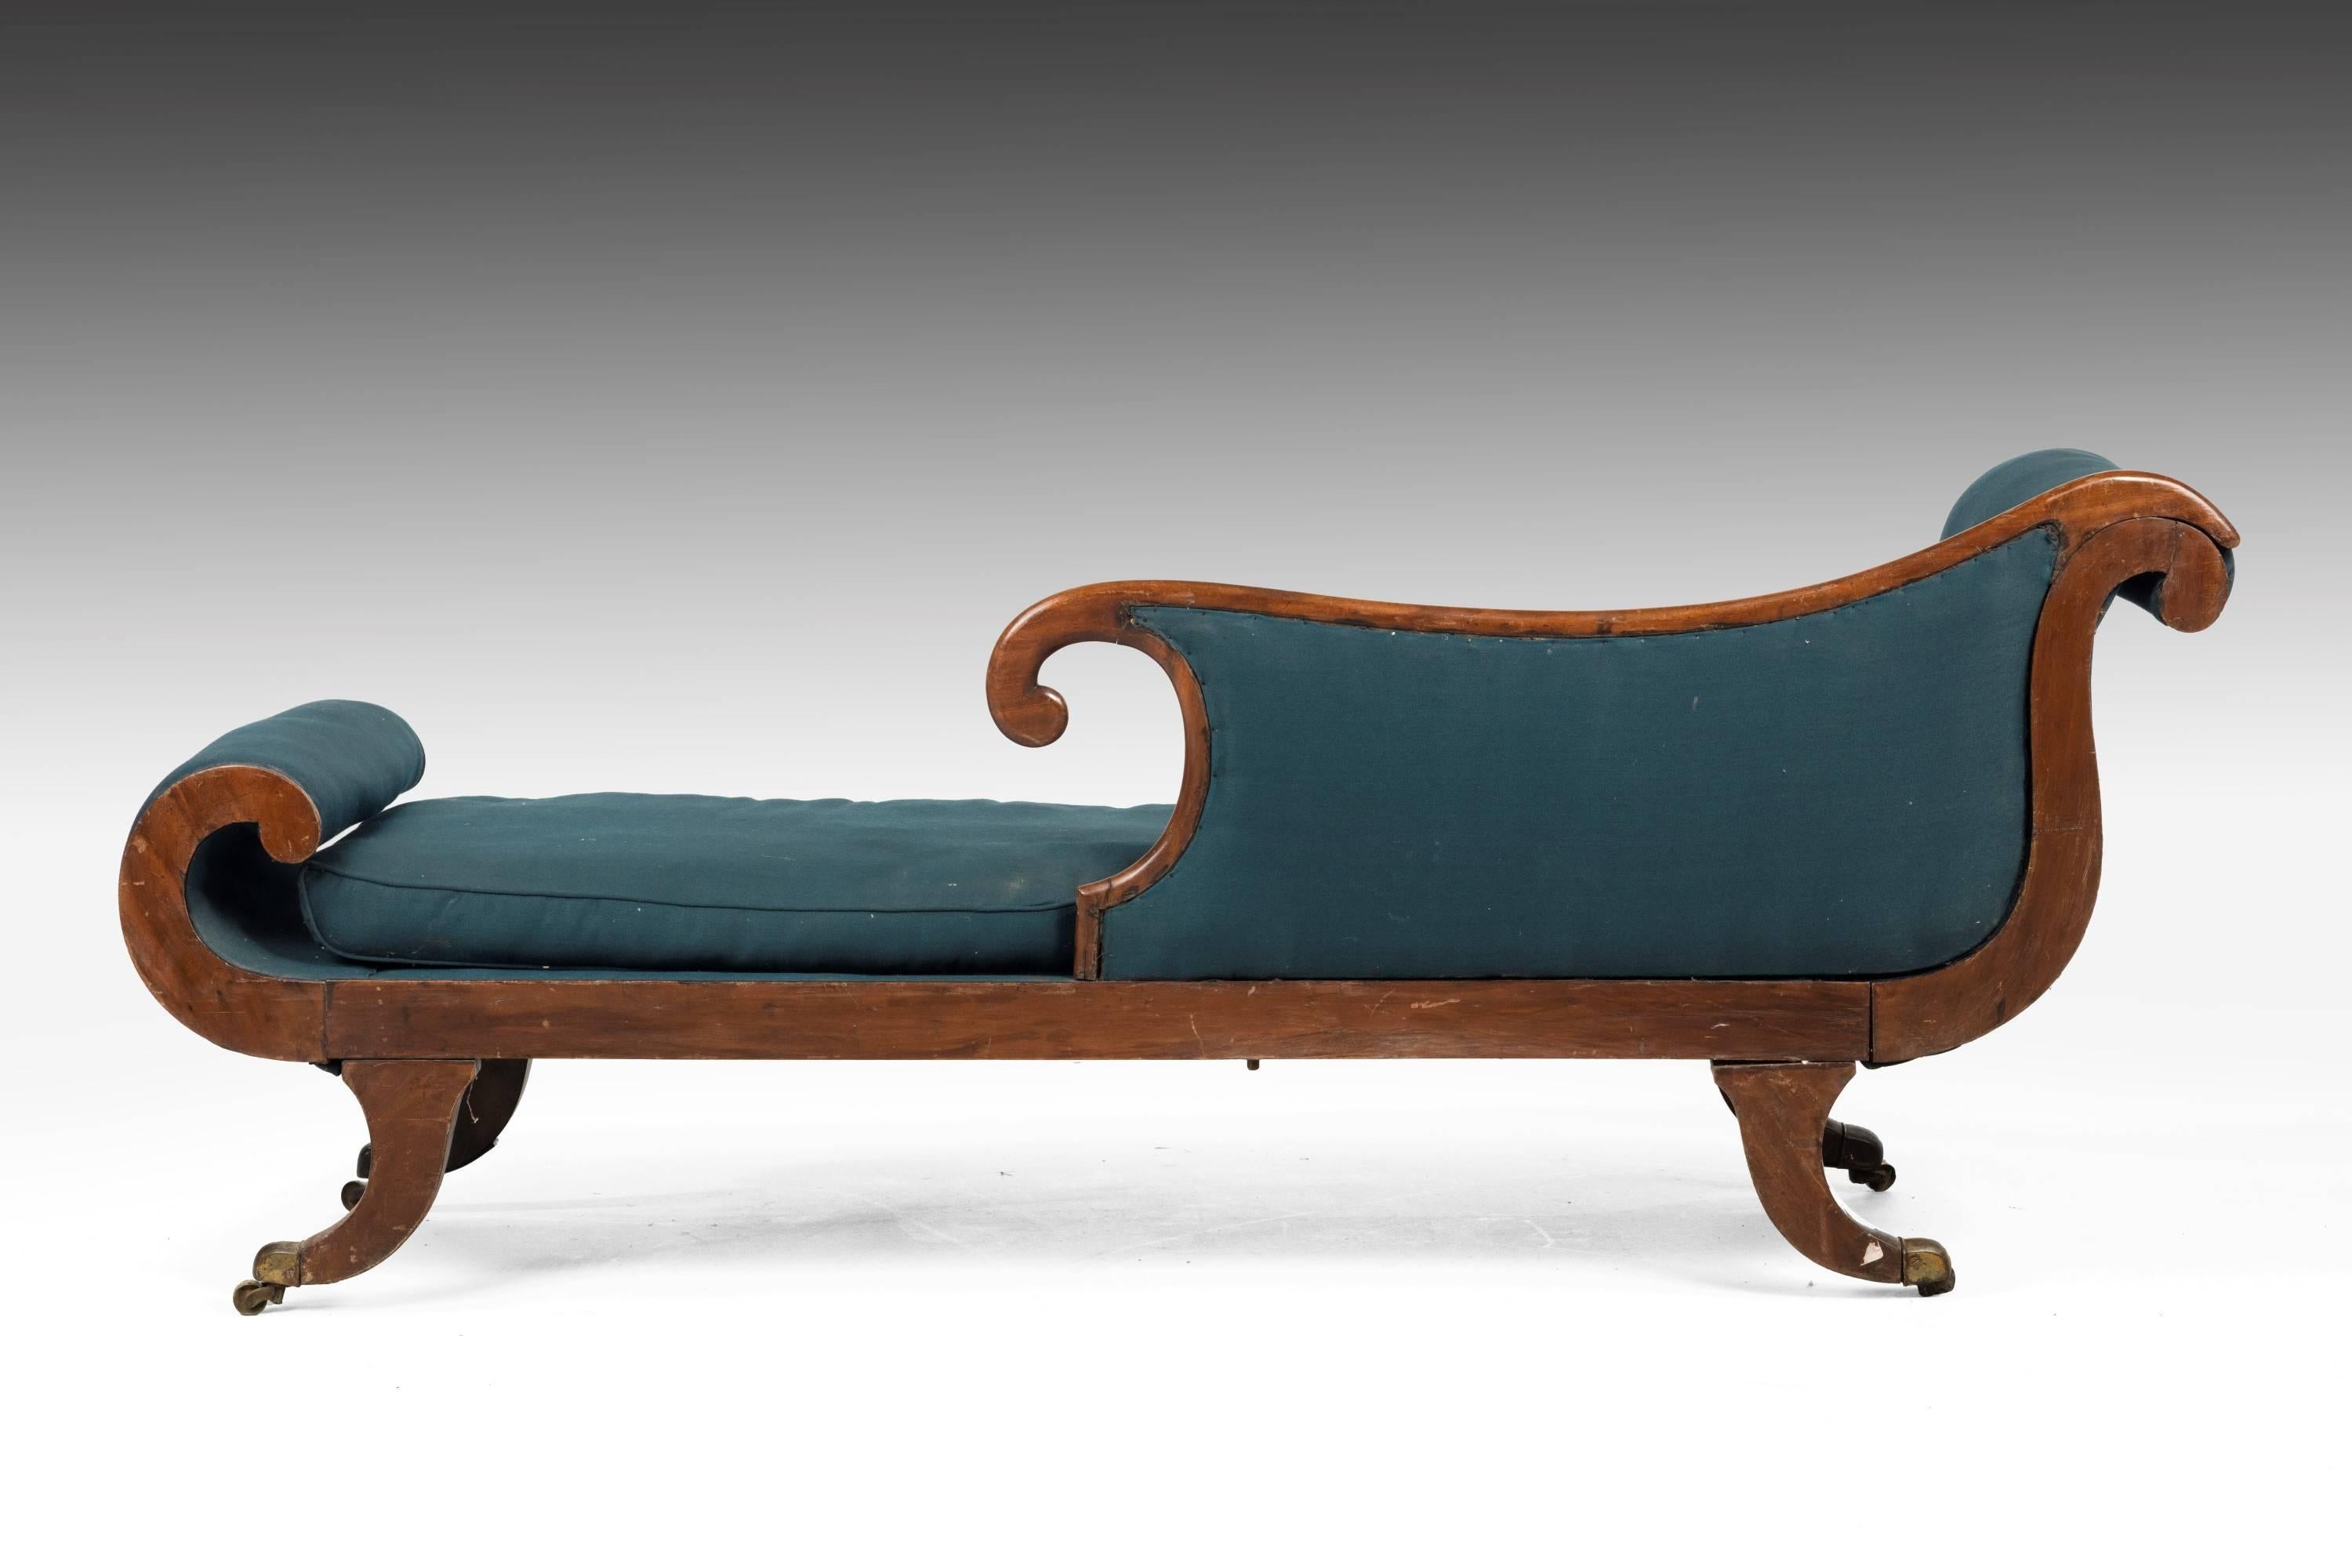 English Early 19th Century Regency Period Chaise Longue